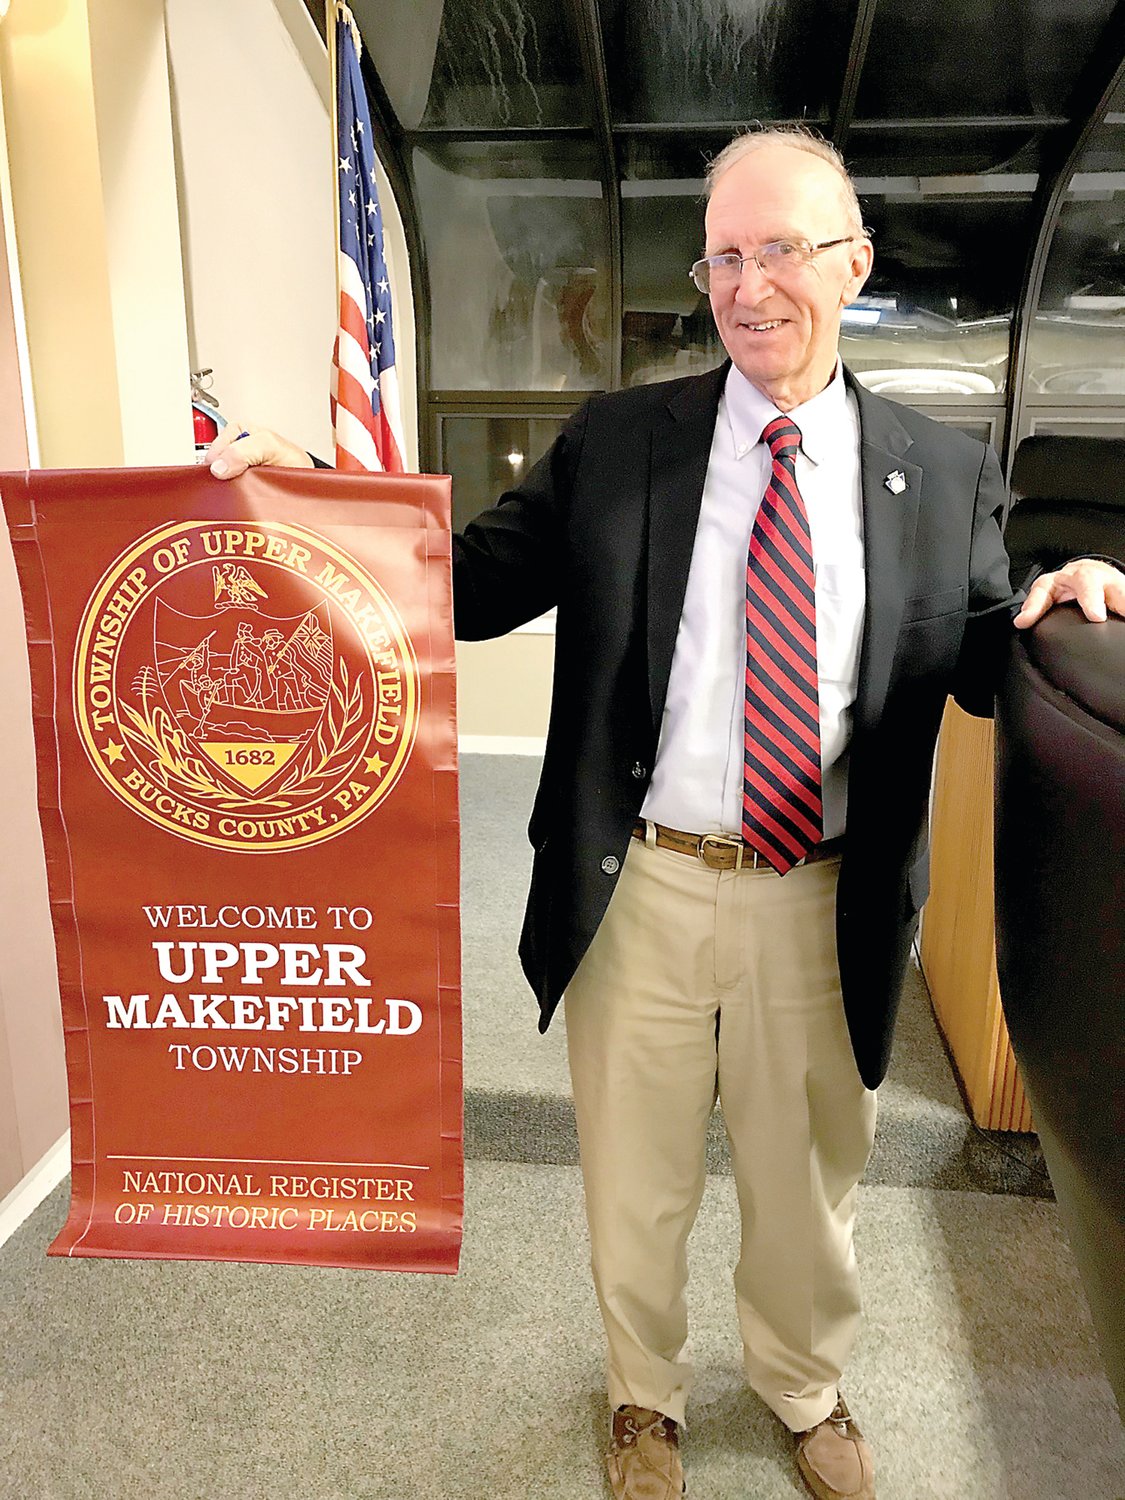 Upper Makefield Township Manager David Nyman displays one of the proposed streetscape banners for Washington Crossing. Photograph by Chris Ruvo.